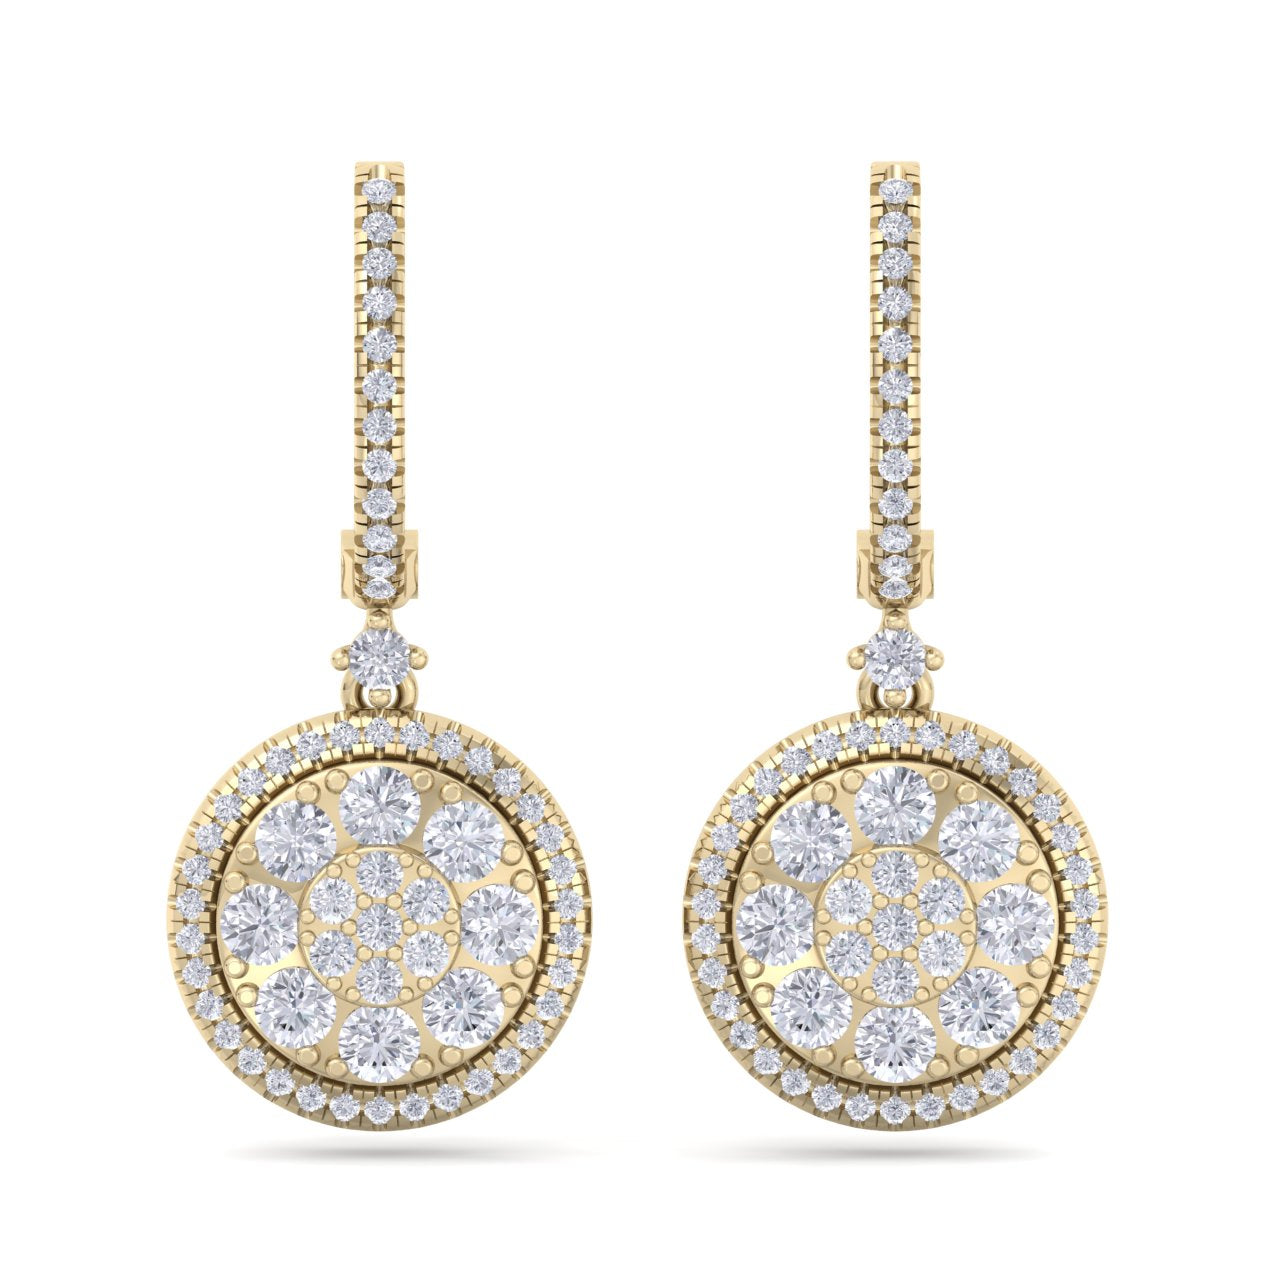 Round earrings in white gold with white diamonds of 1.83 ct in weight - HER DIAMONDS®